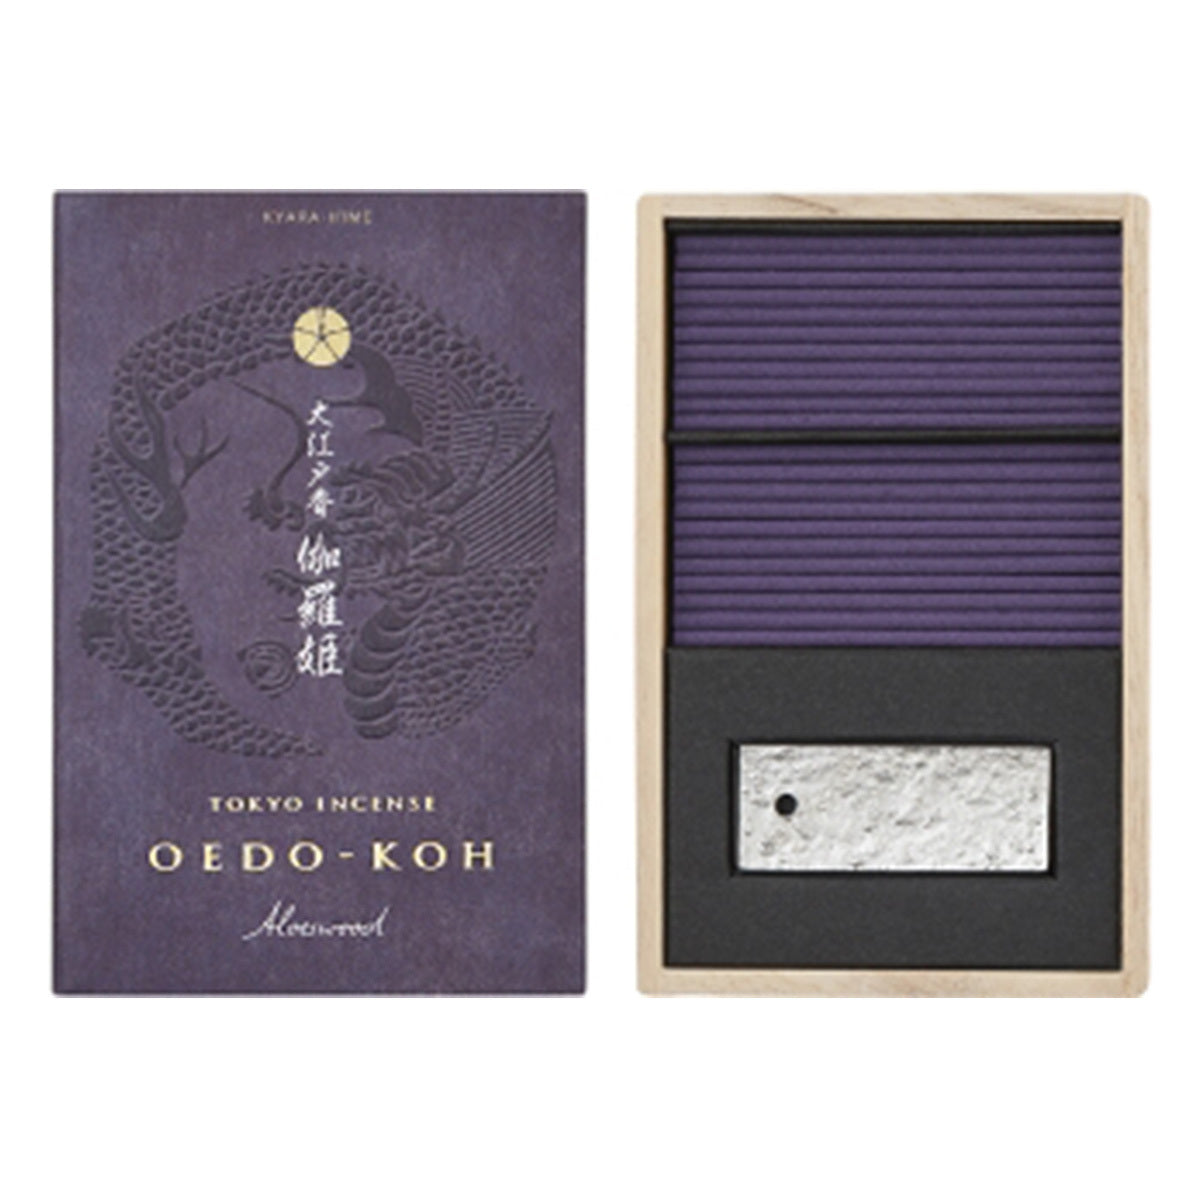 Primary image of Aloeswood Tokyo Incense